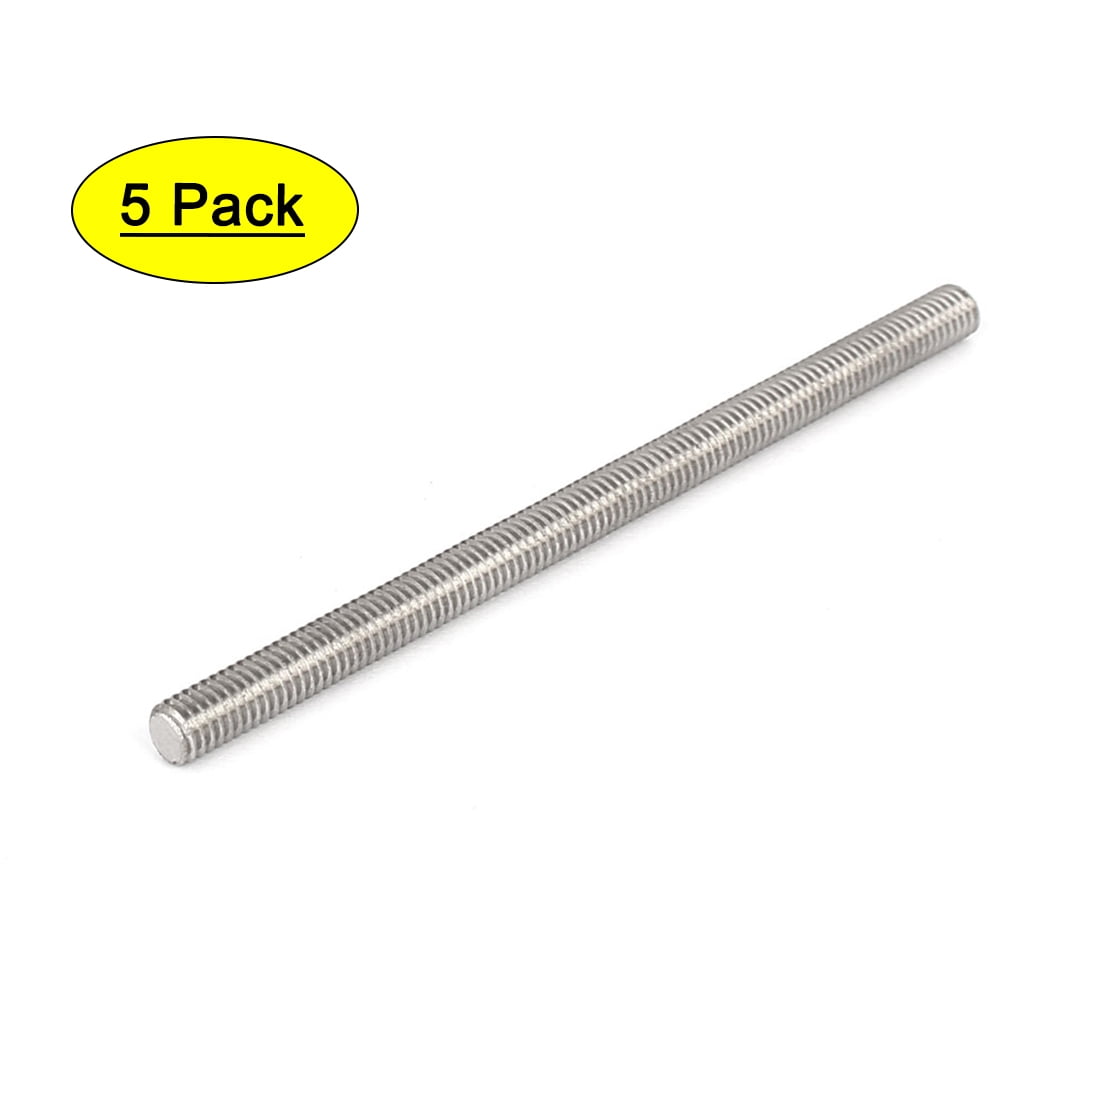 MHUI Fully Threaded Rod M6 304 Stainless Steel Used for Assembly Fastening Two Length Options 5pcs ,M6 X 250mm 5Pcs